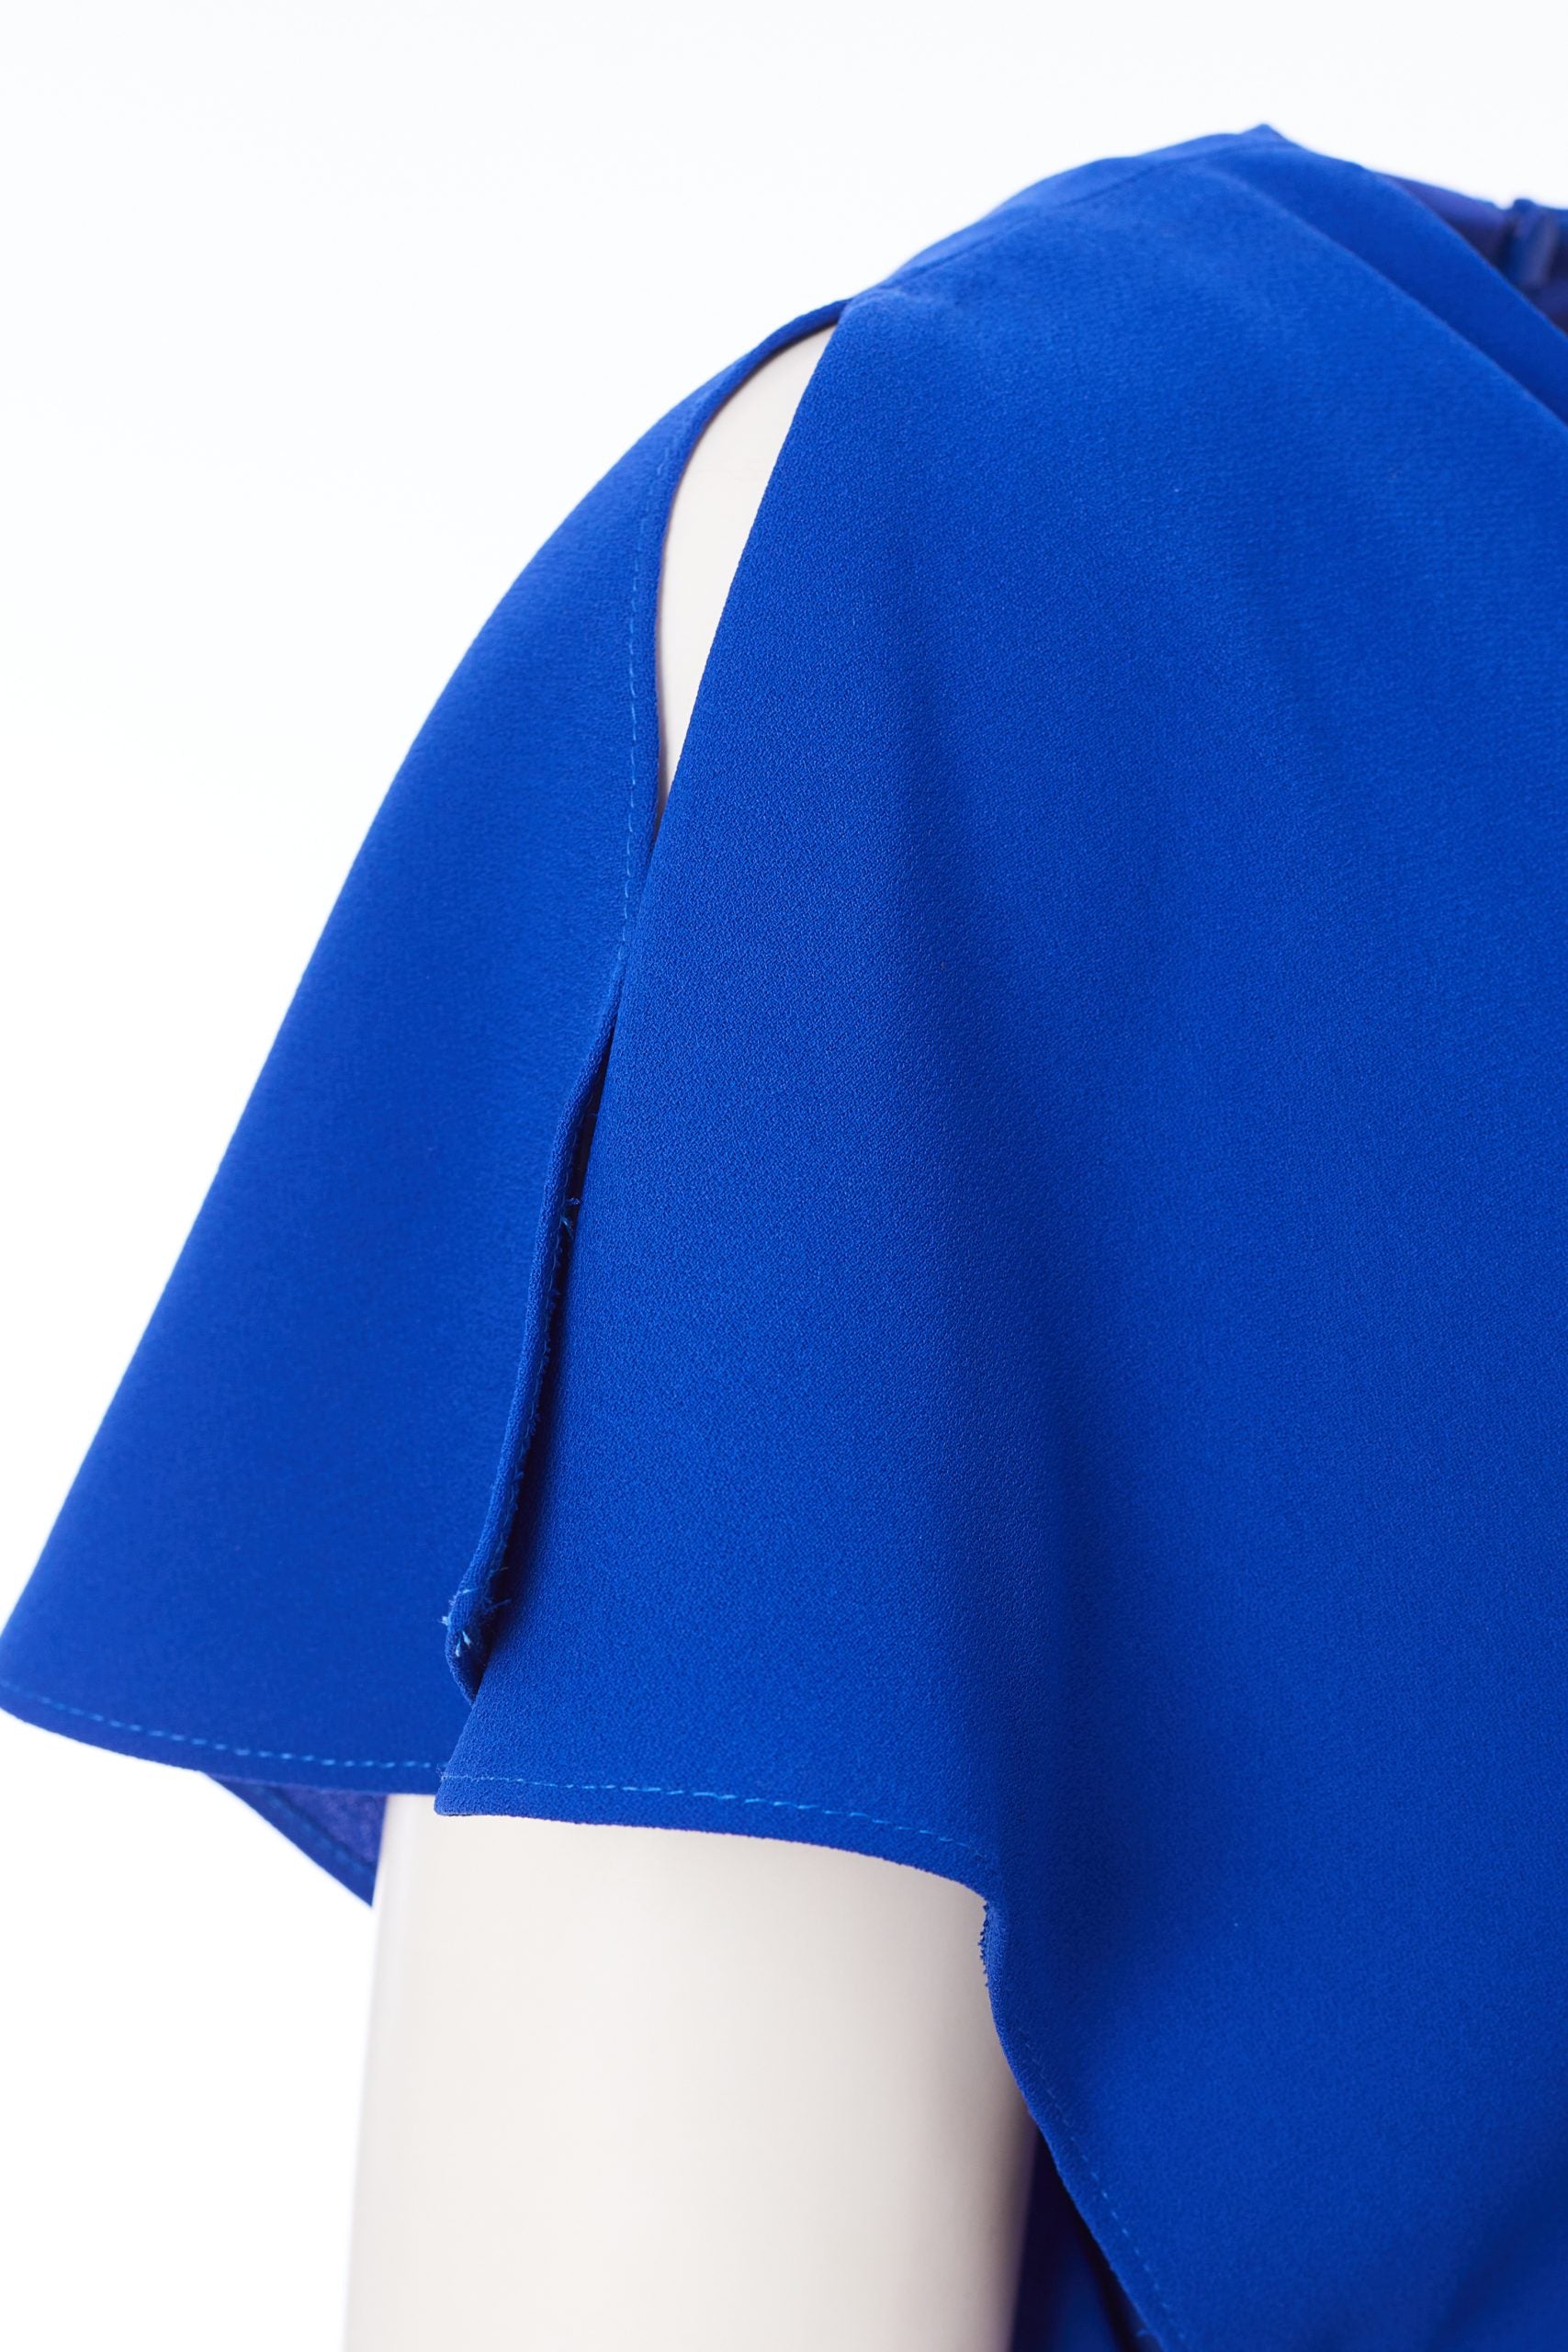 V-Neck Dress with Sleeve Detail in Royal Blue